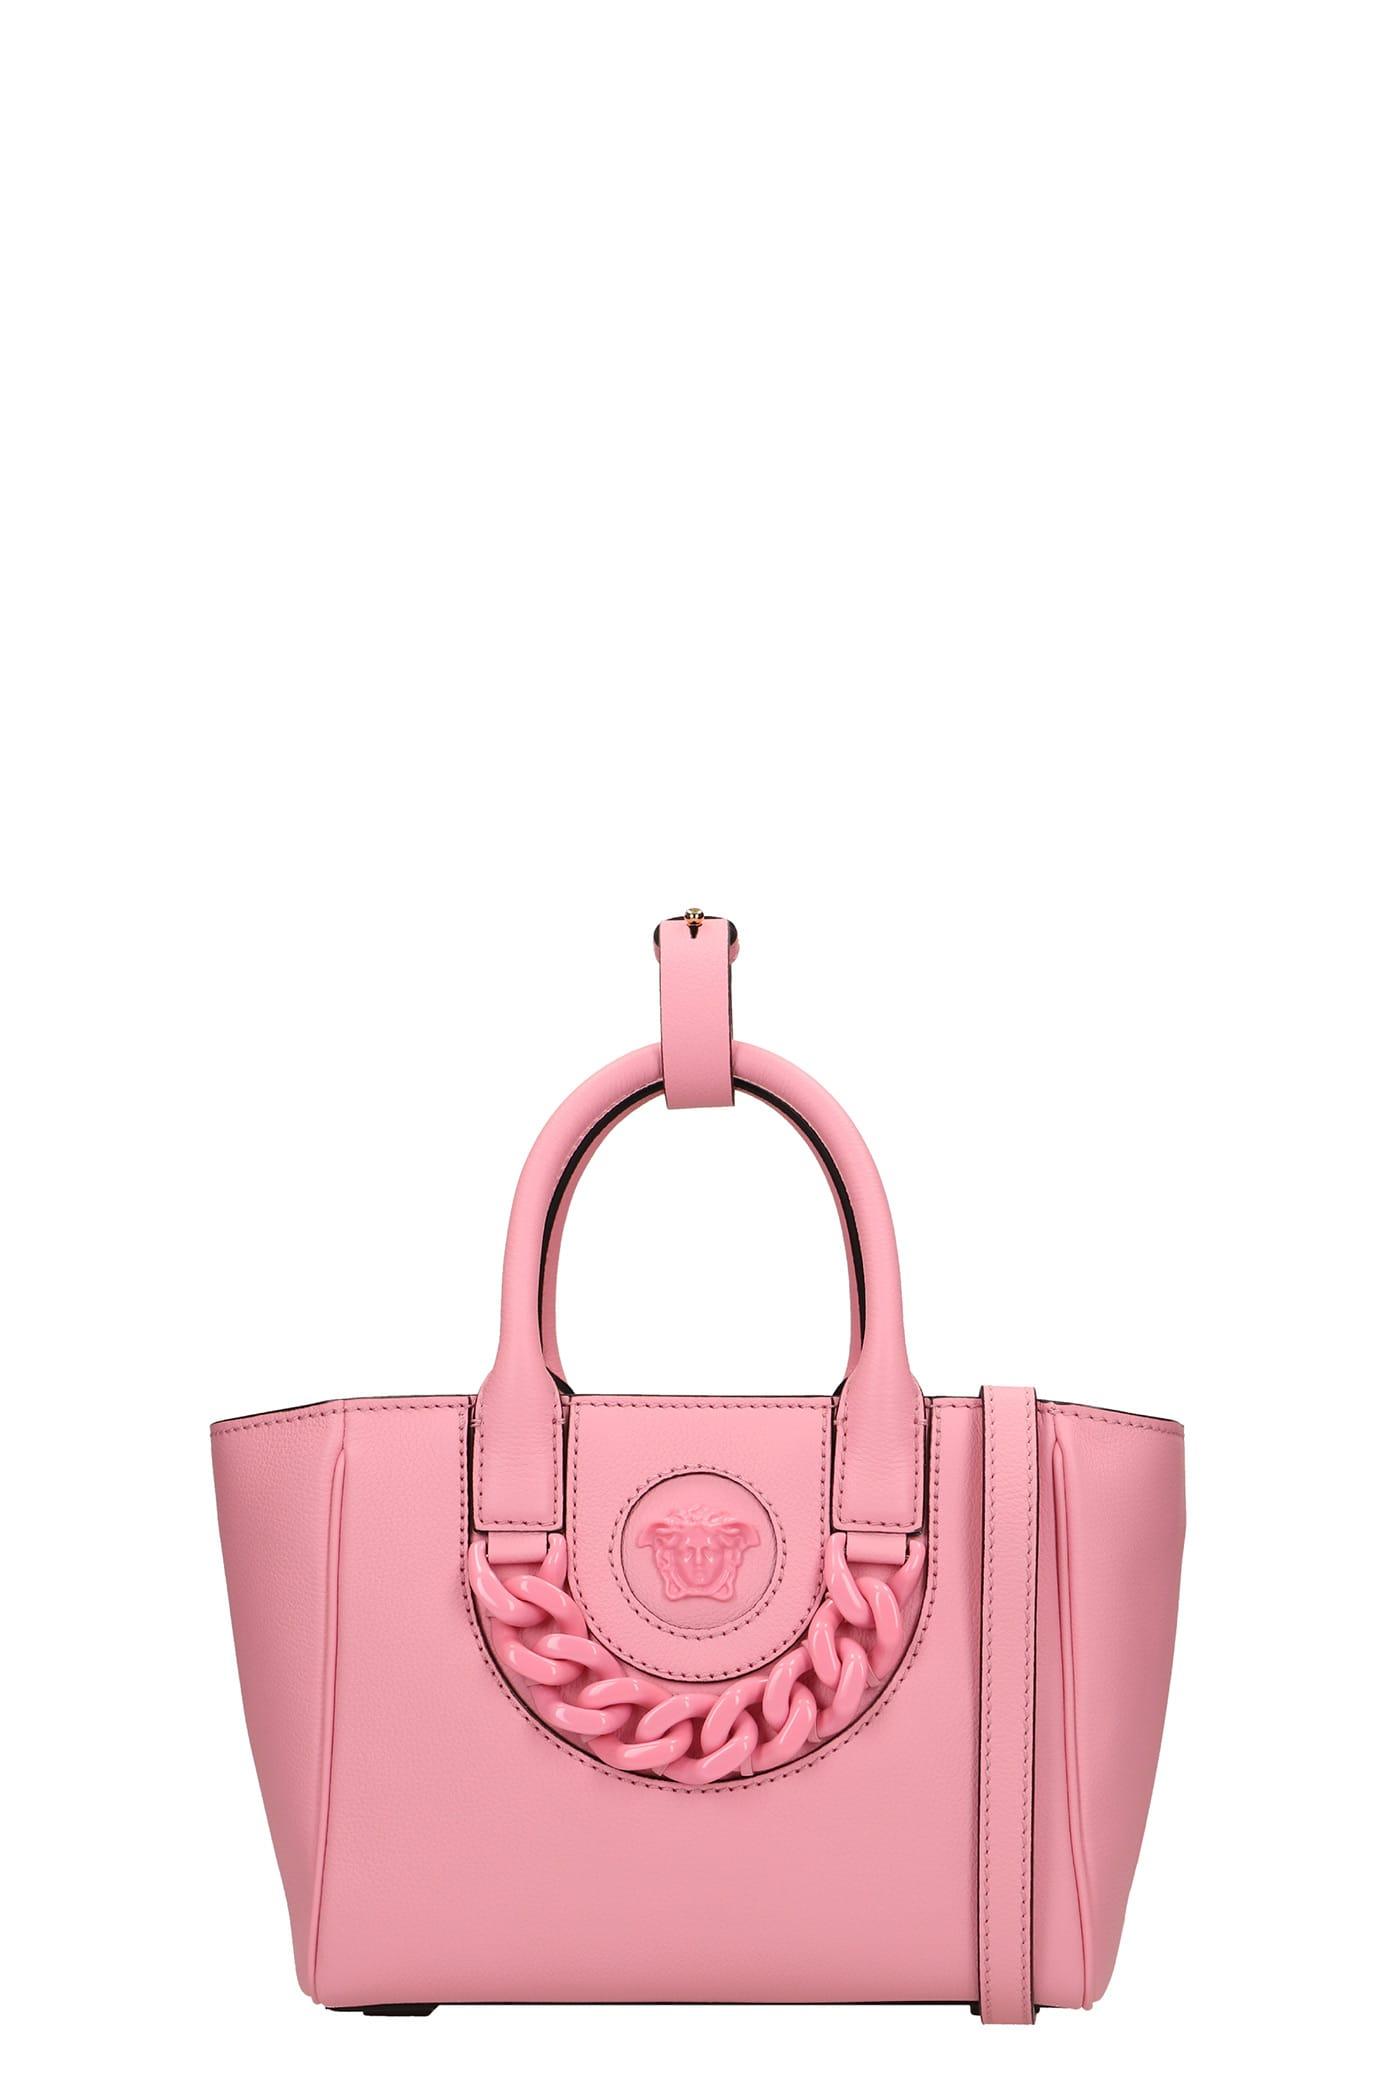 Versace Hand Bag In Rose-pink Leather | Lyst